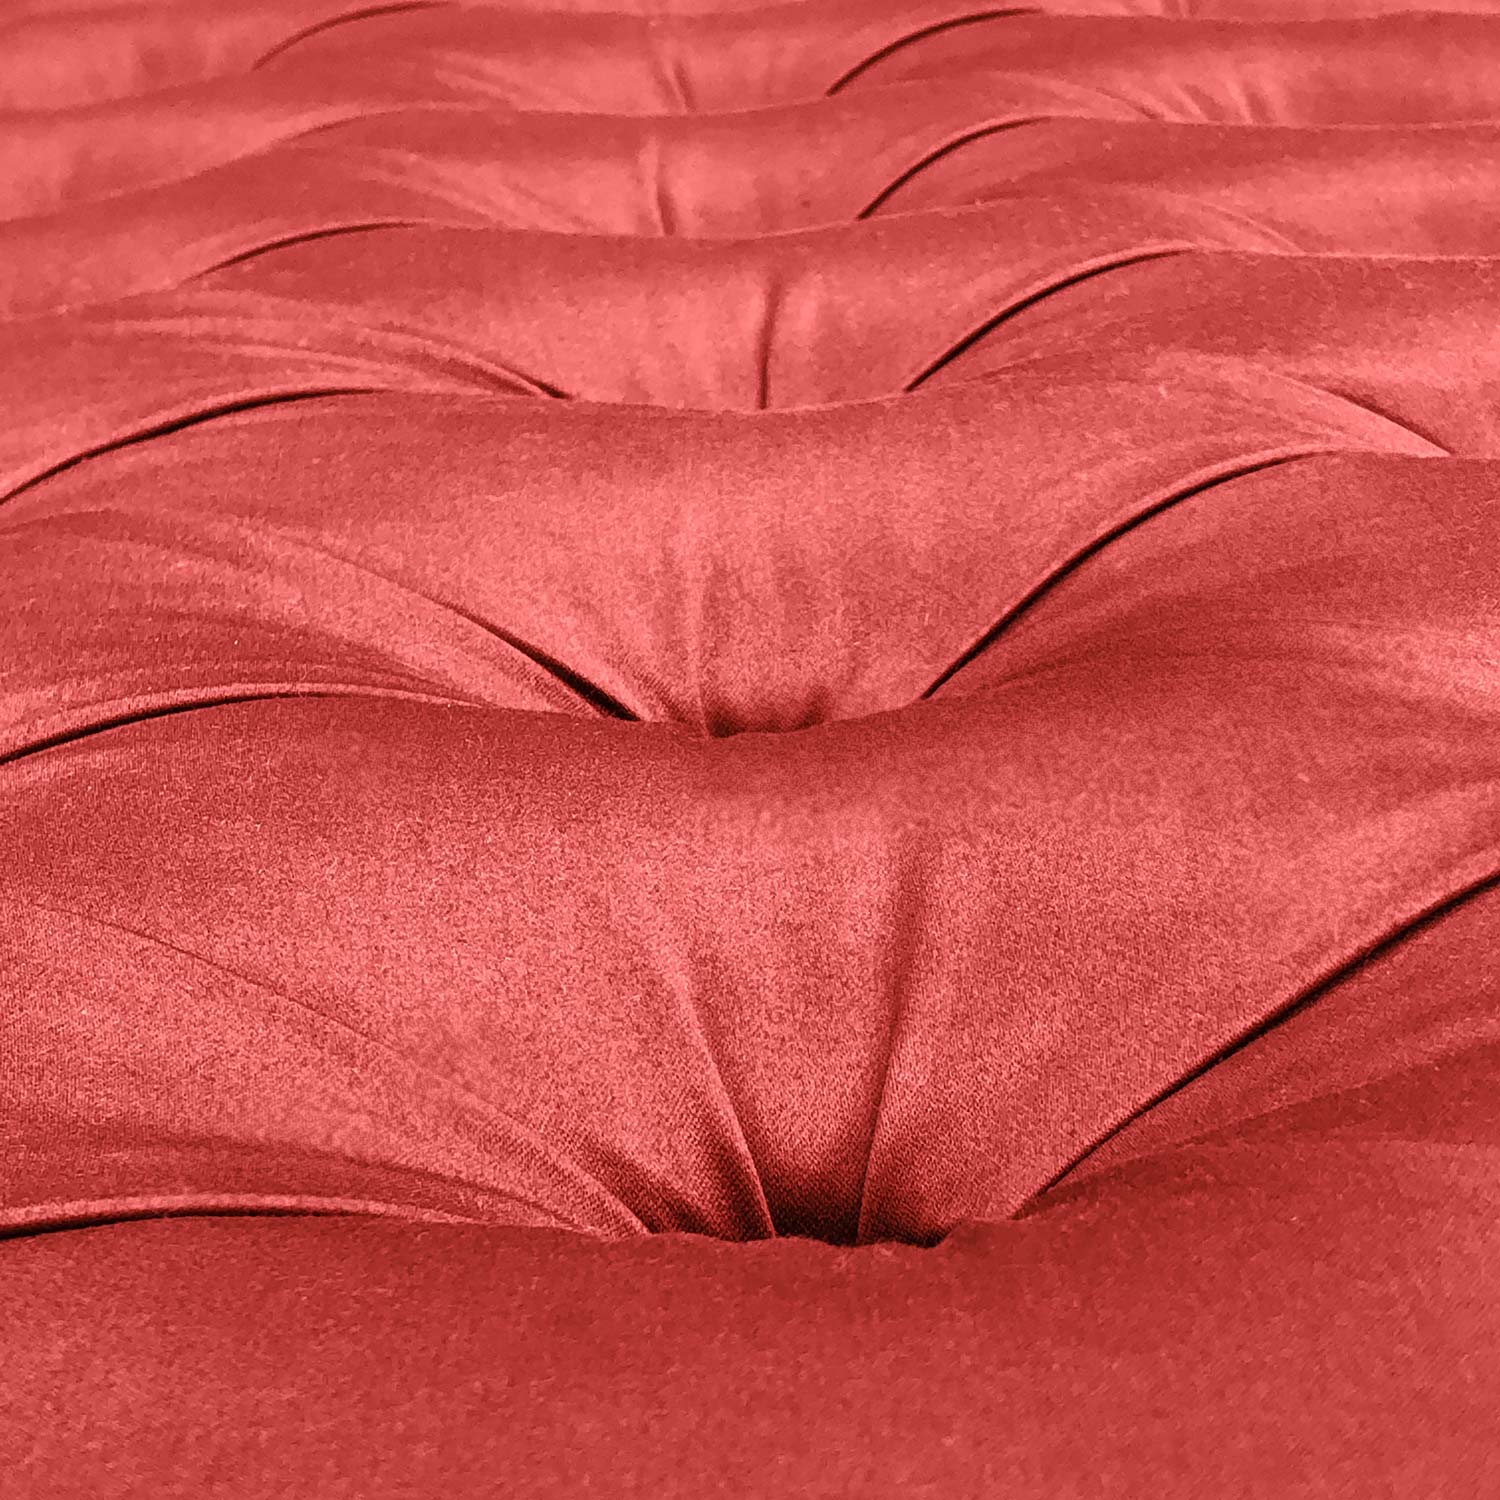 detail of satin capitonne upholstery in red